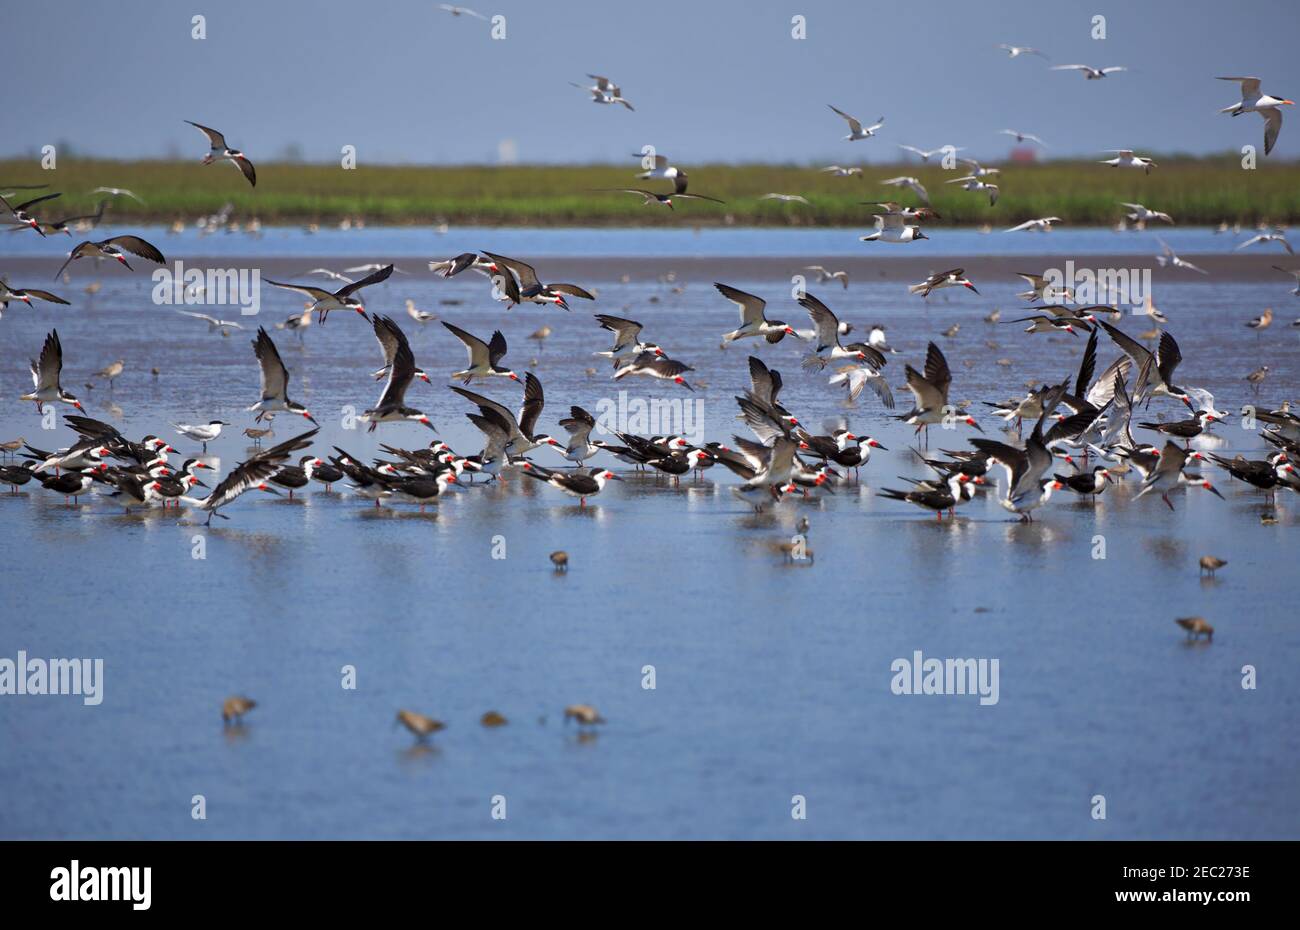 Black Skimmers, Rinchops niger.  A flock of Black Skimmers in the bay at Port Bolivar, Texas Gulf Coast Stock Photo